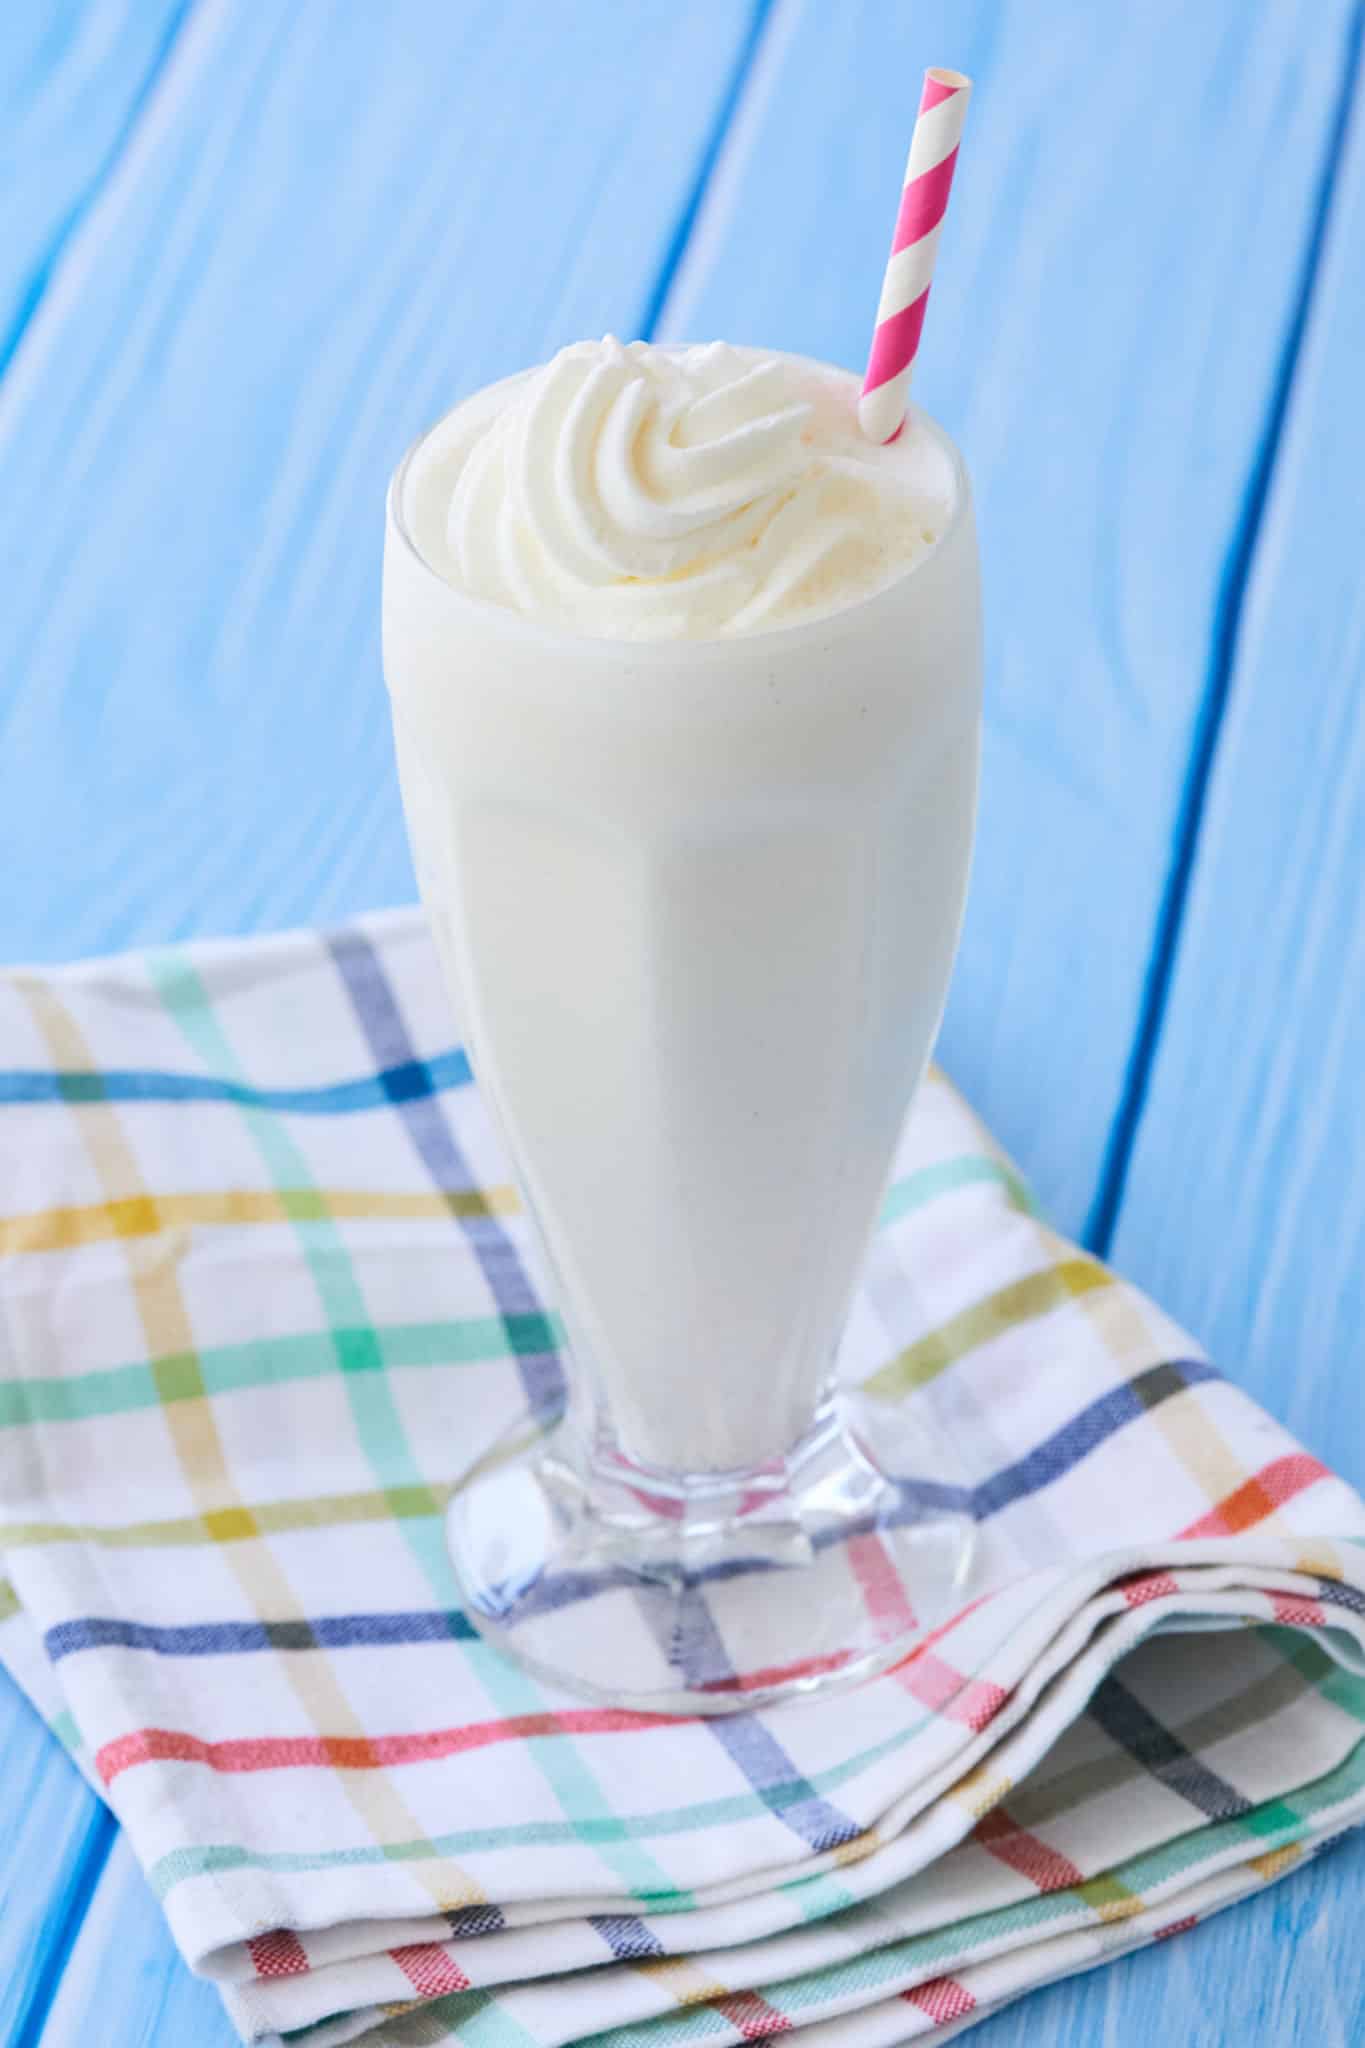 A finished vanilla malt milkshake topped with whipped cream